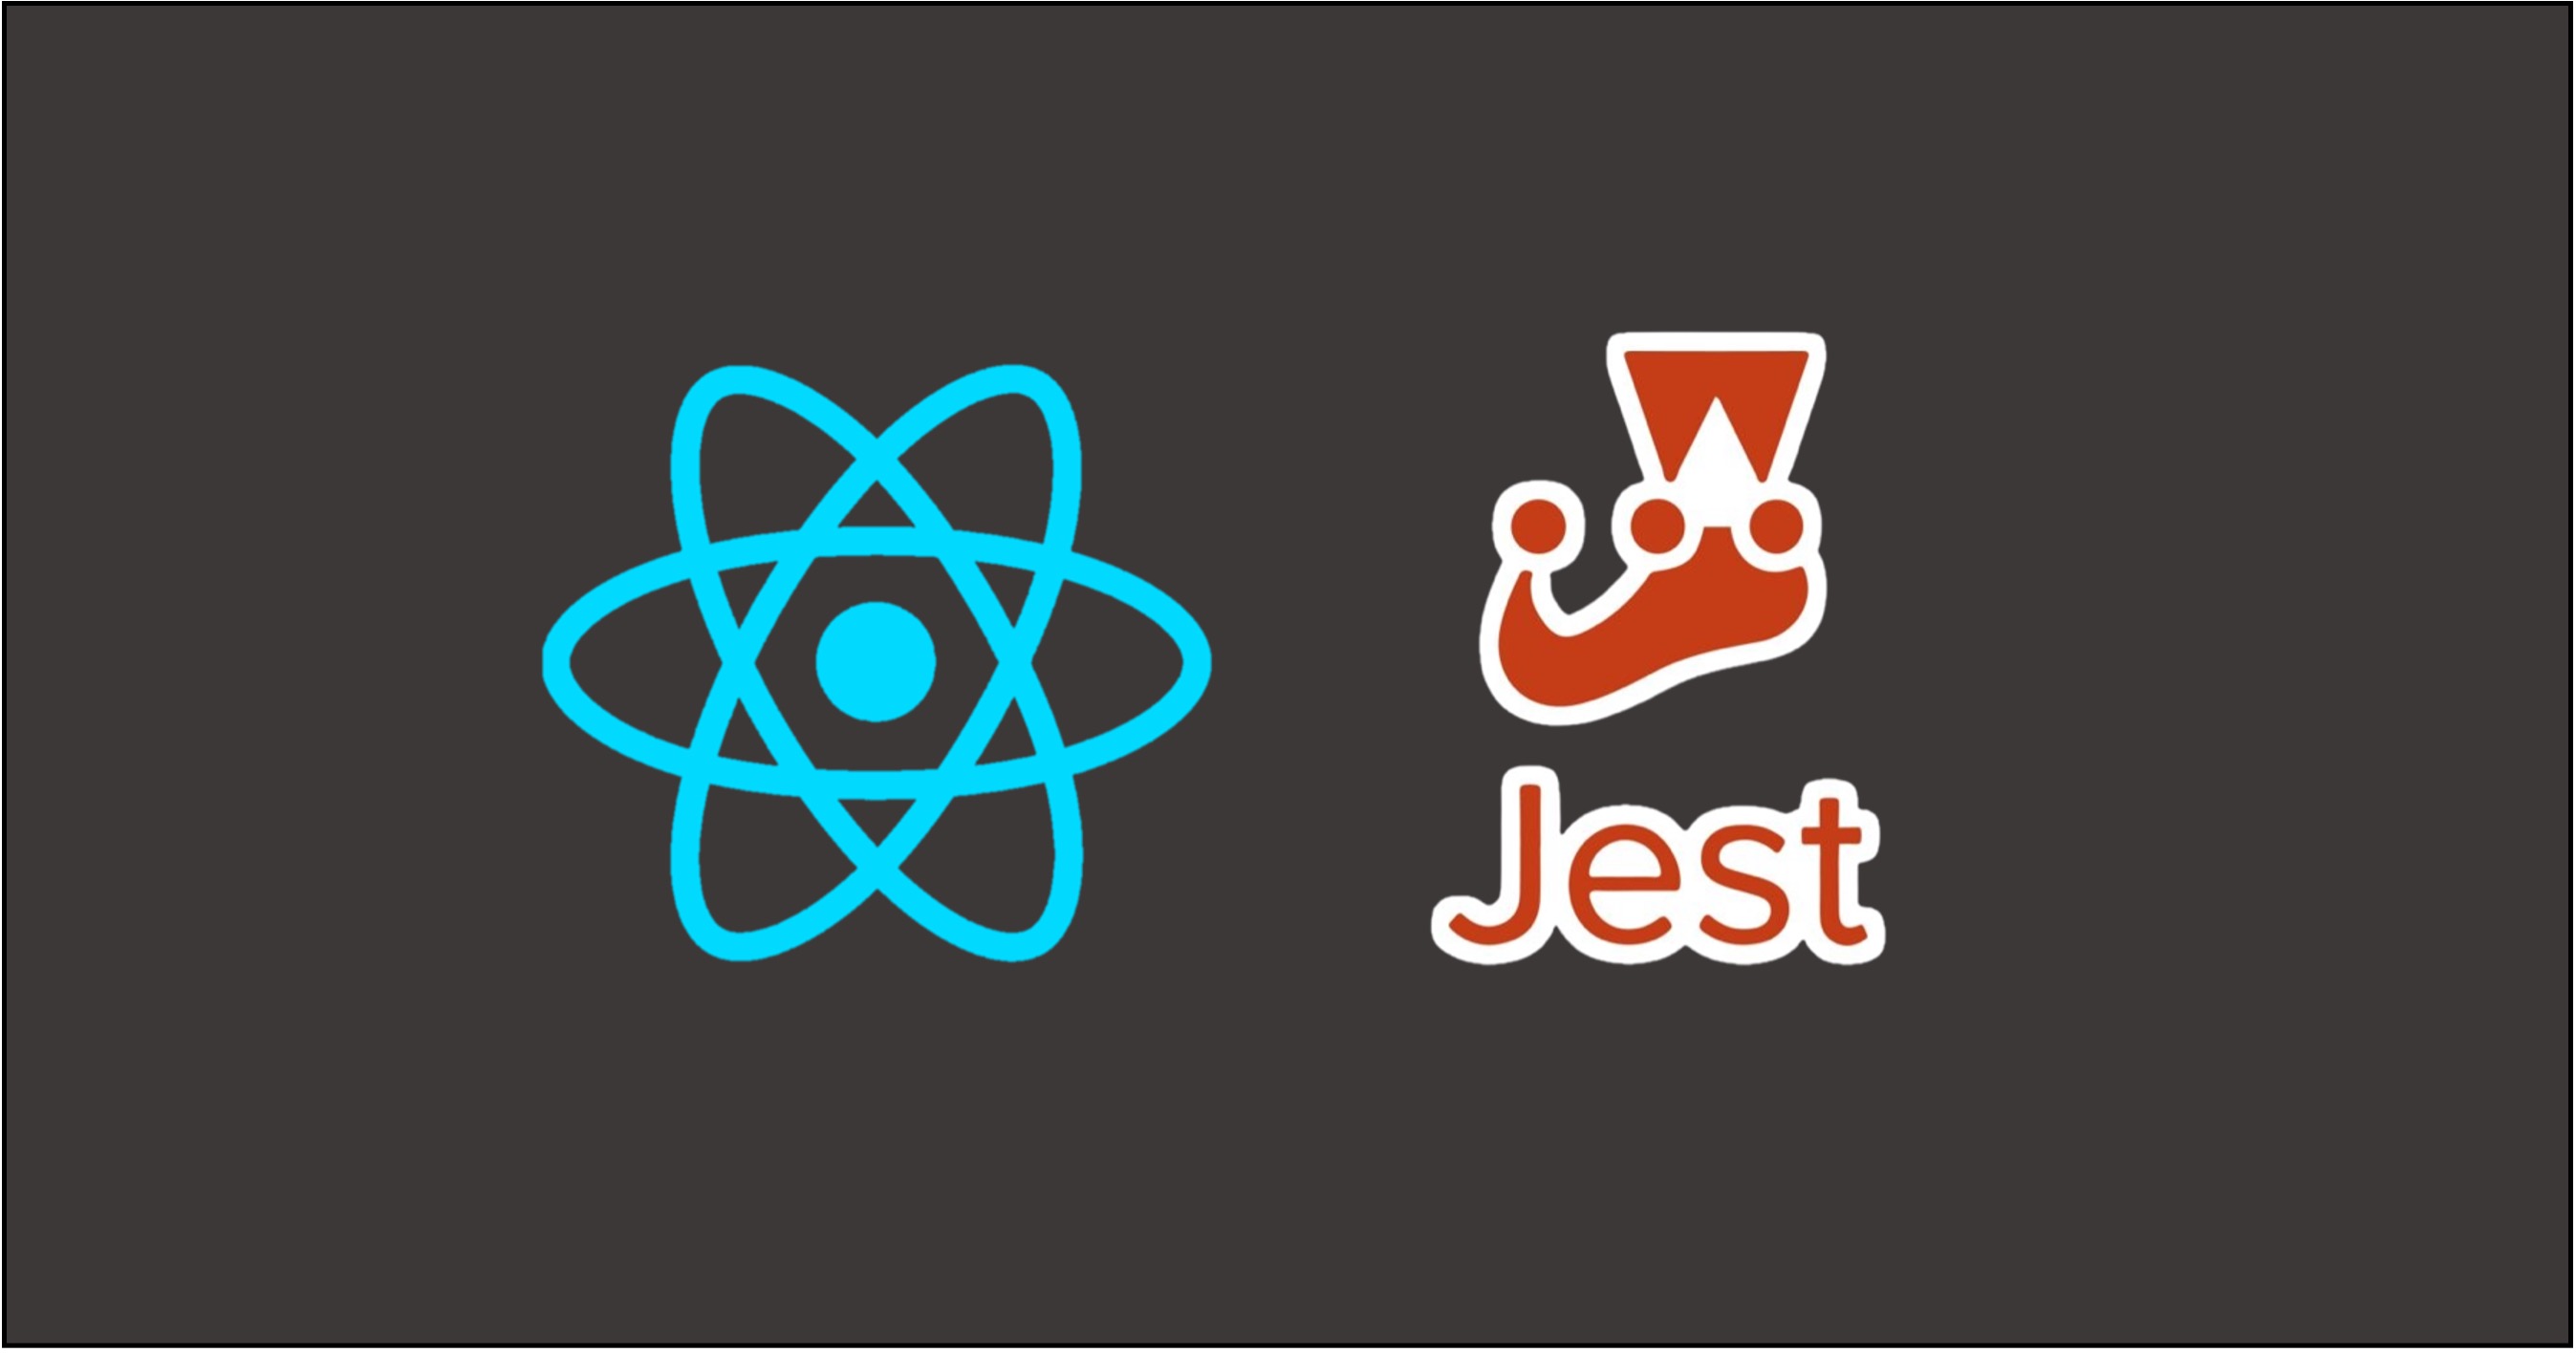 React's and Jest's logo on a dark gray background